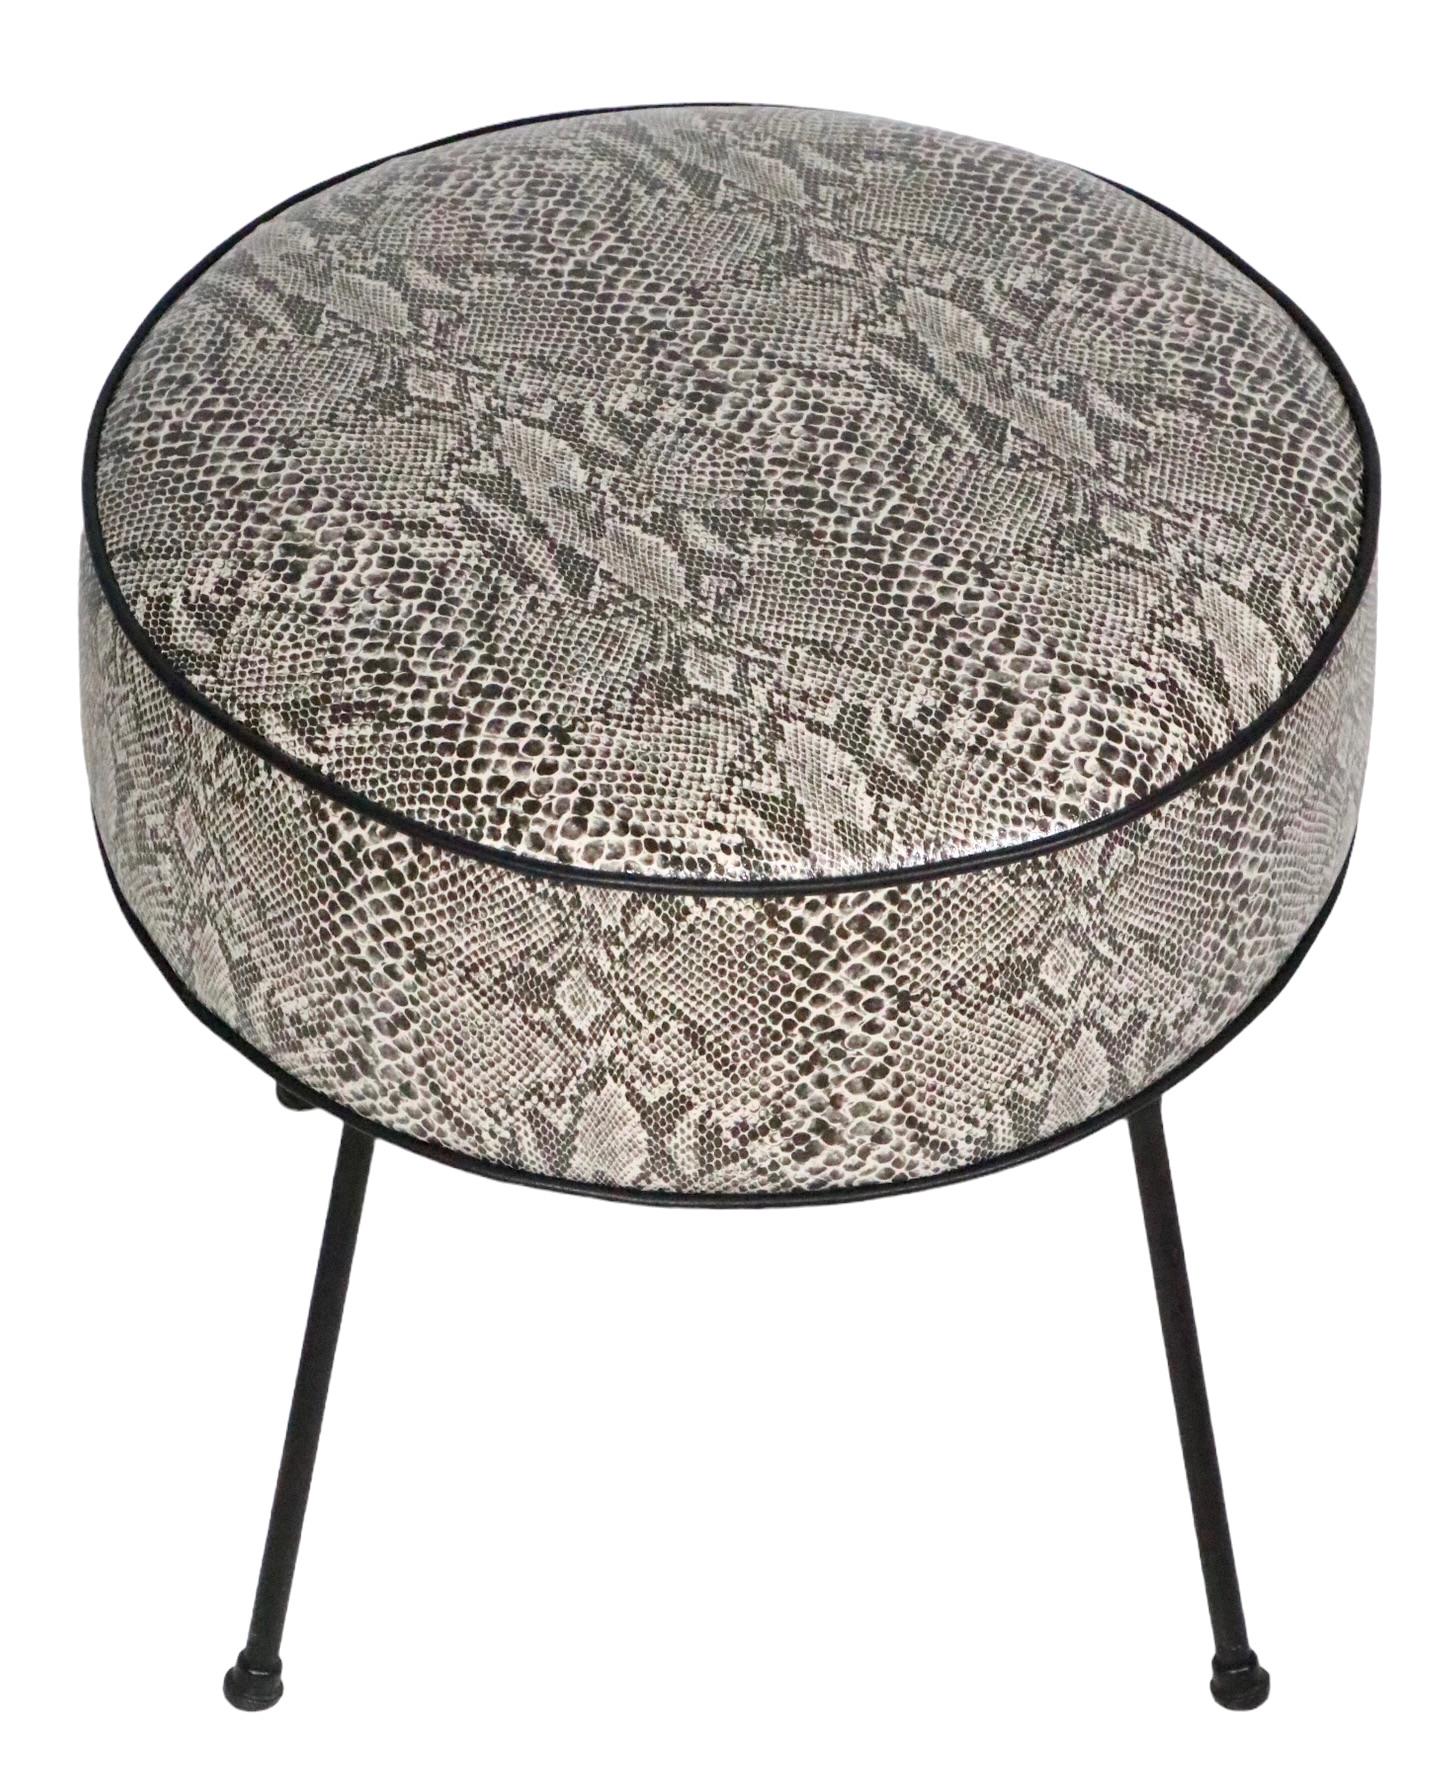 Mid Century Foot Stool Pouf Ottoman Reupholstered in Black and White Faux Python 1